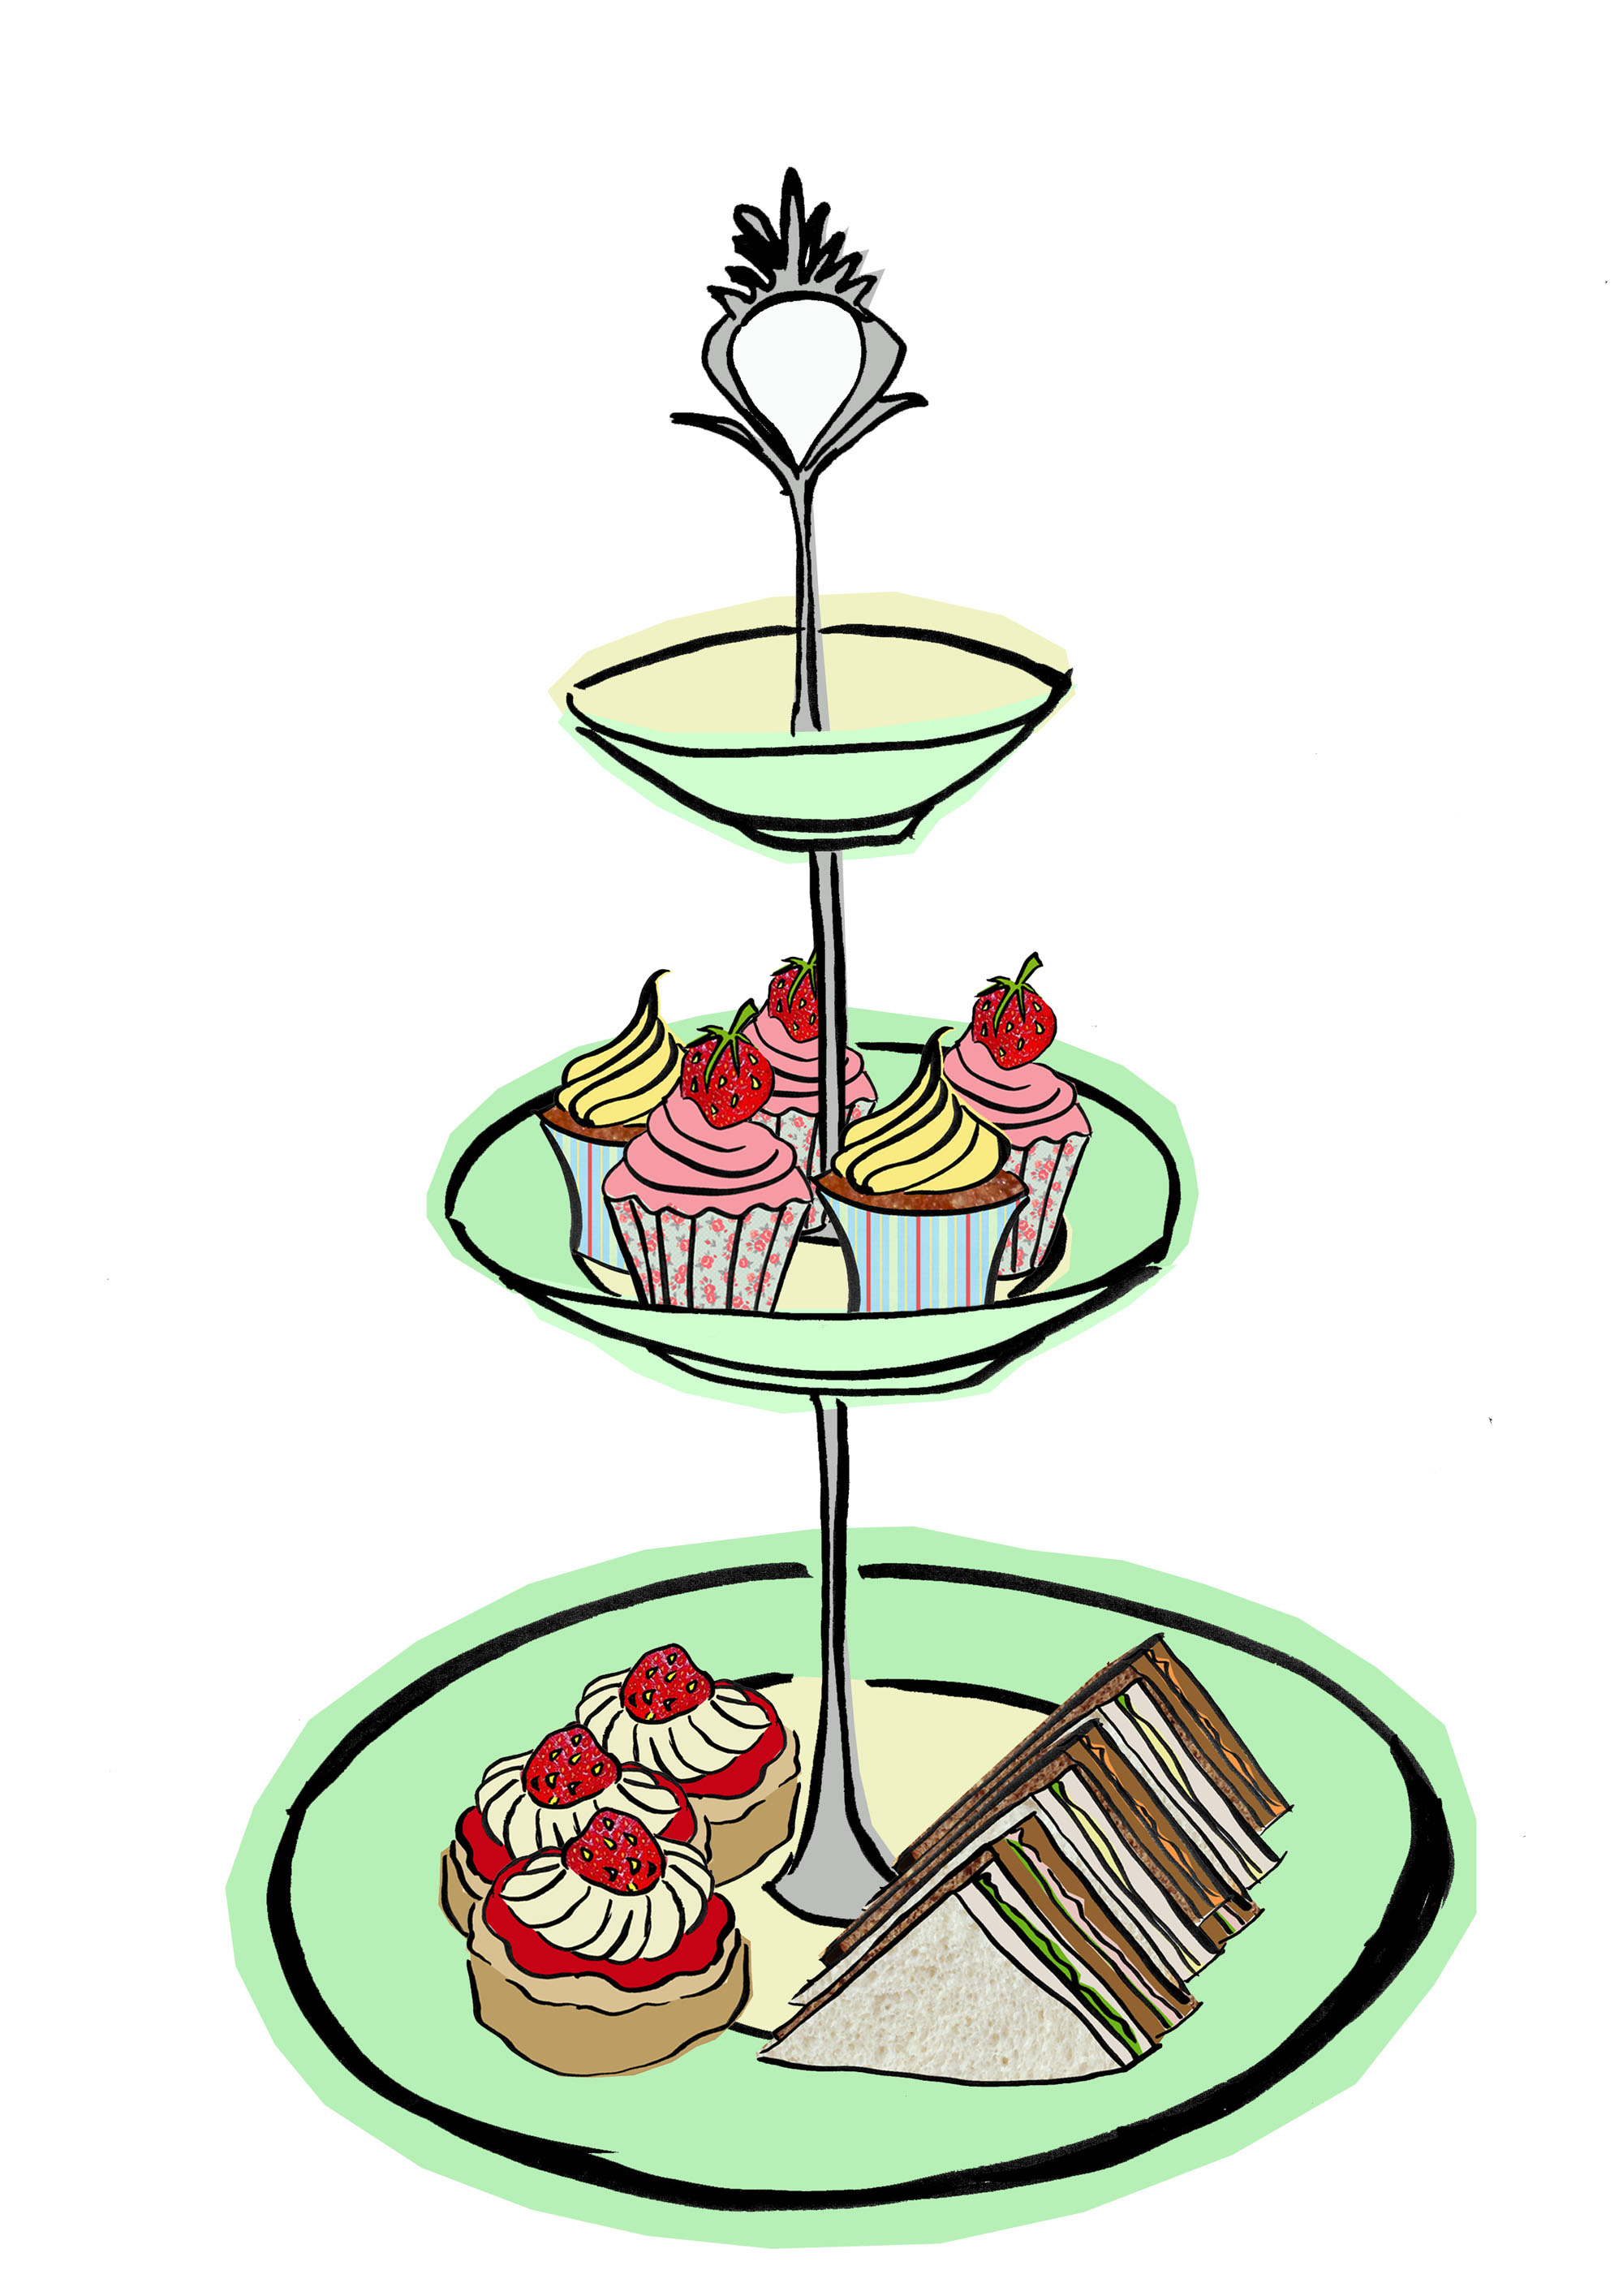 Afternoon tea clipart - Clipground